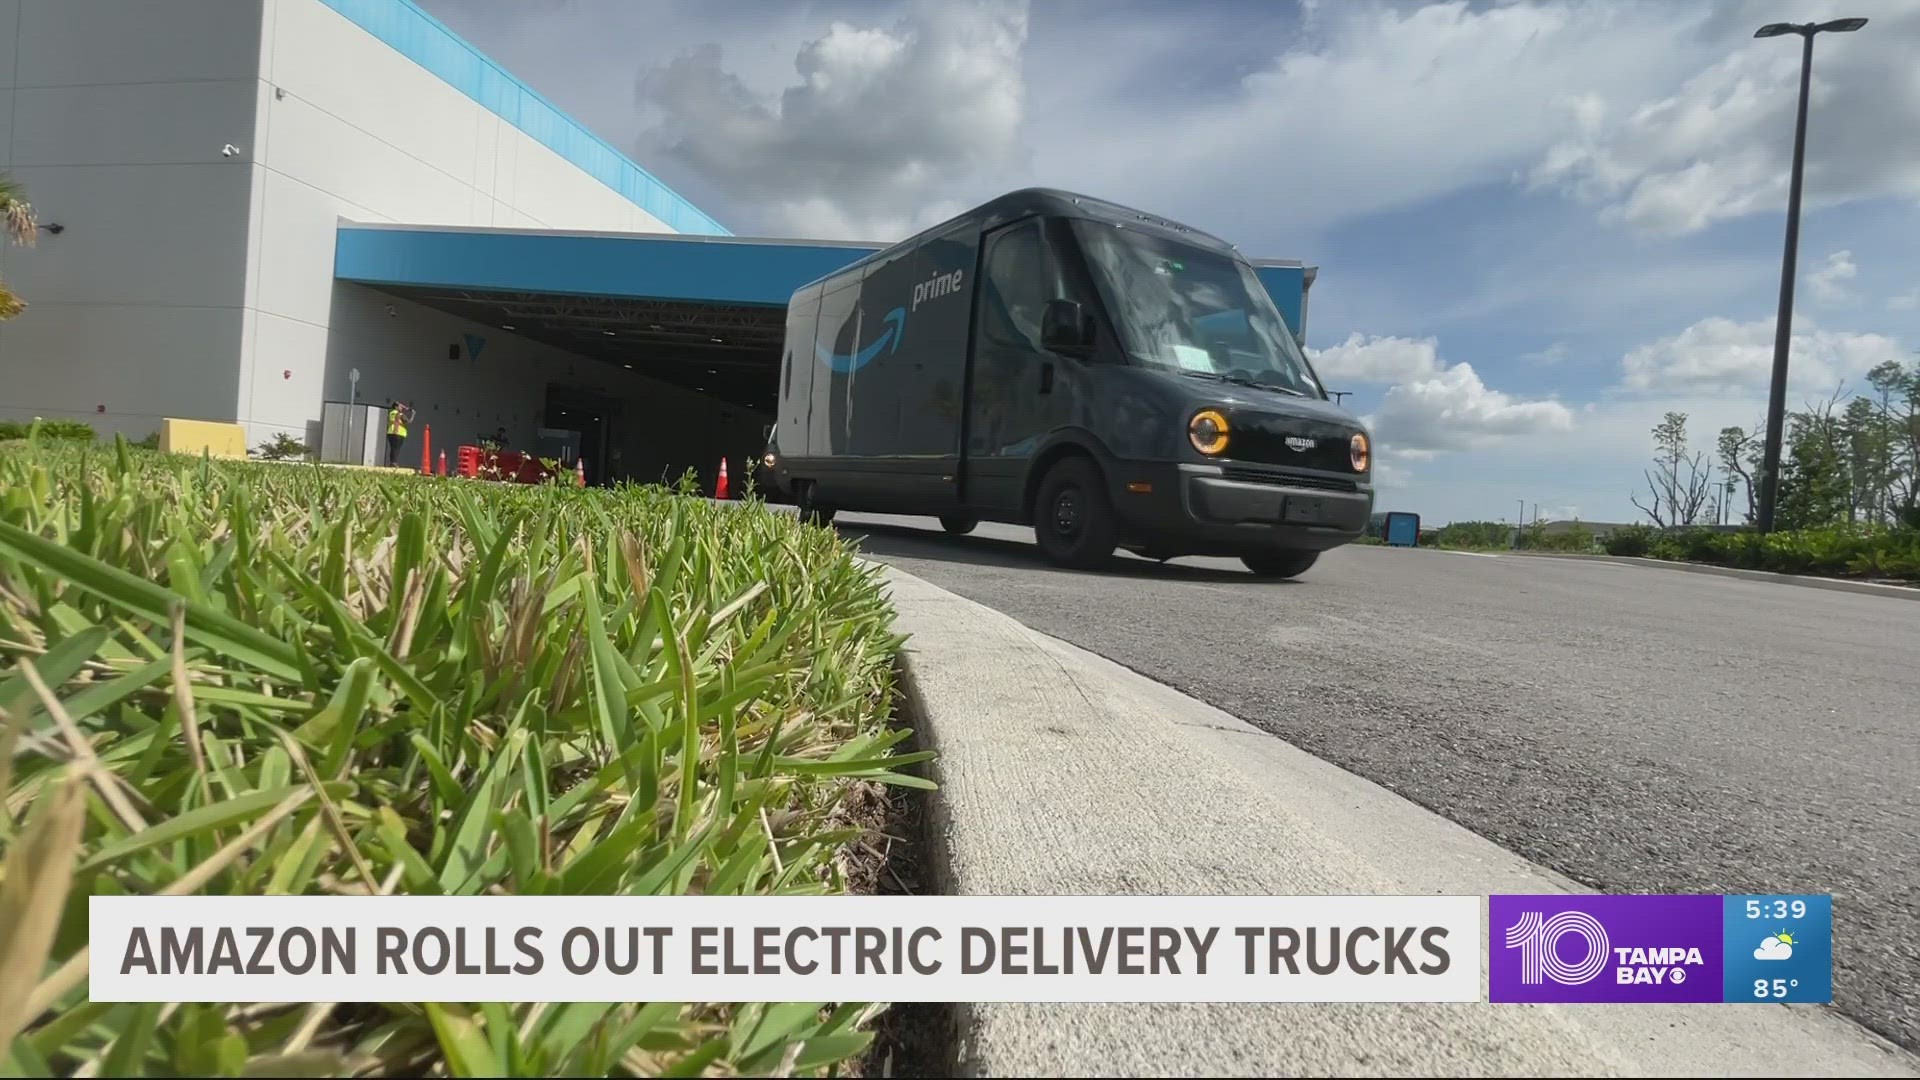 Amazon expects to roll out 100,000 electric delivery trucks by 2030.